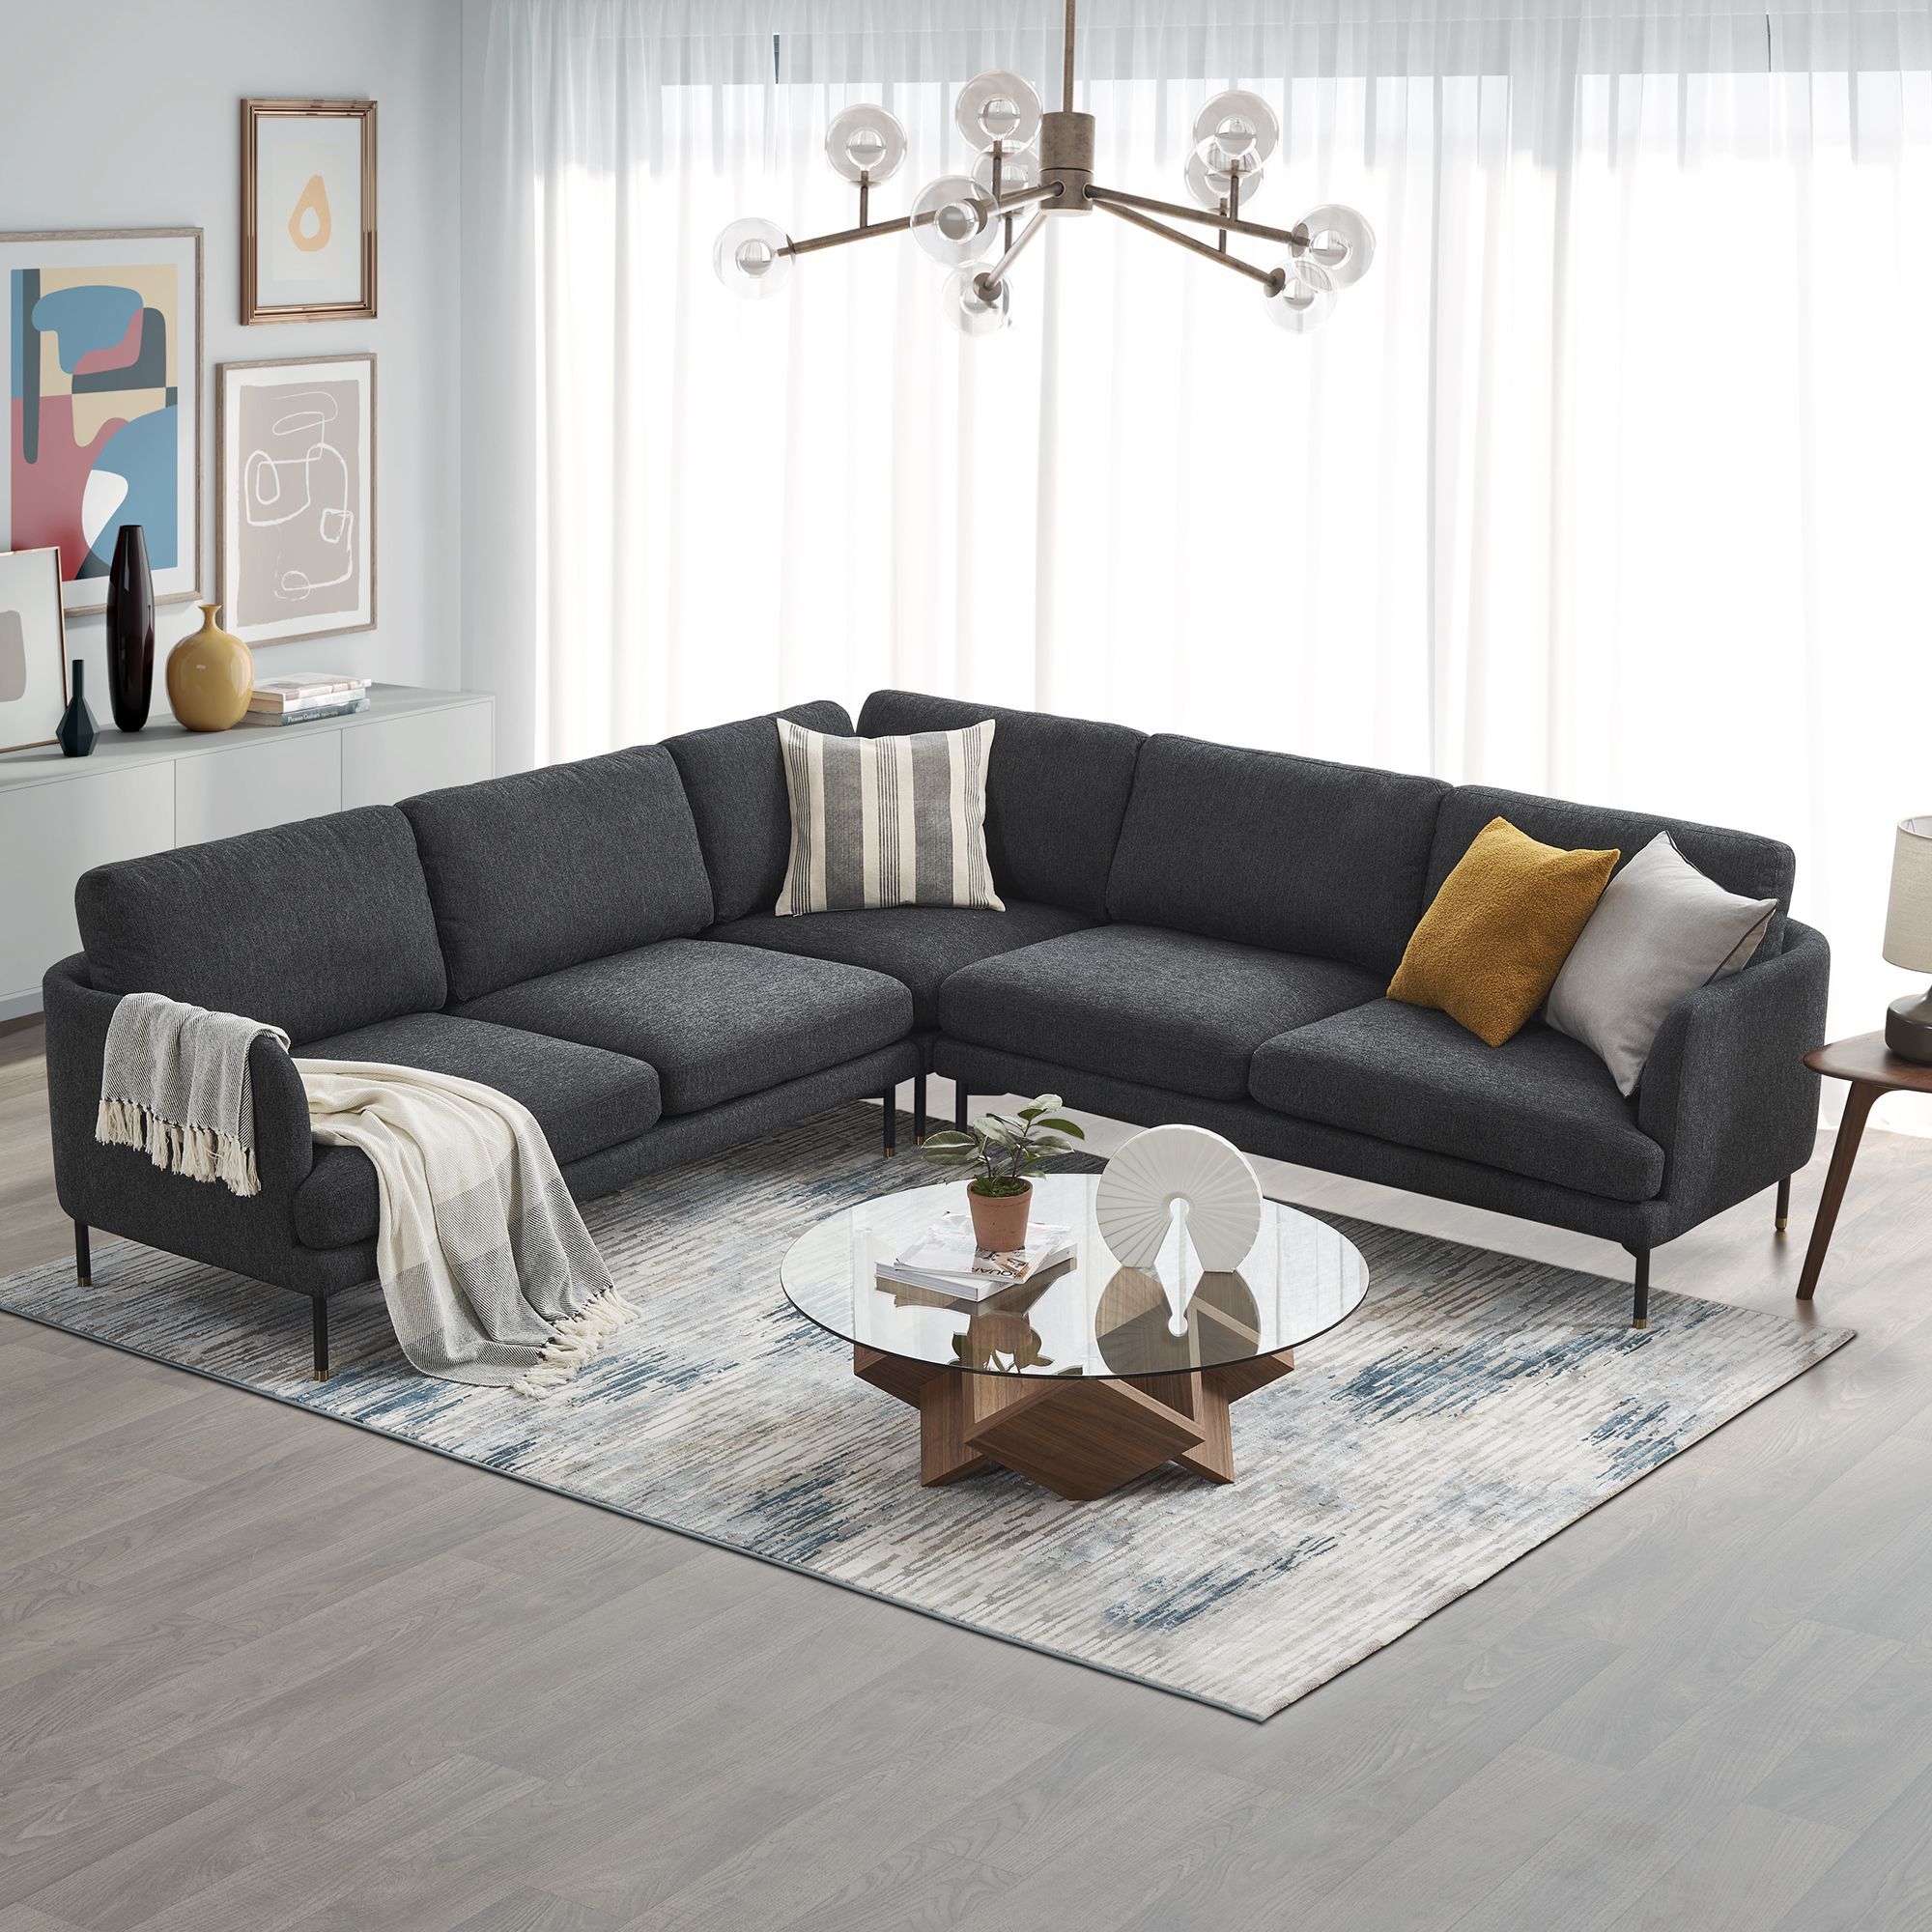 Pebble L Shape Sectional Sofa | Castlery | Dark Grey Sofa Living Room, Grey  Sofa Living Room, Living Room Color Schemes Pertaining To Dark Gray Sectional Sofas (Photo 9 of 15)